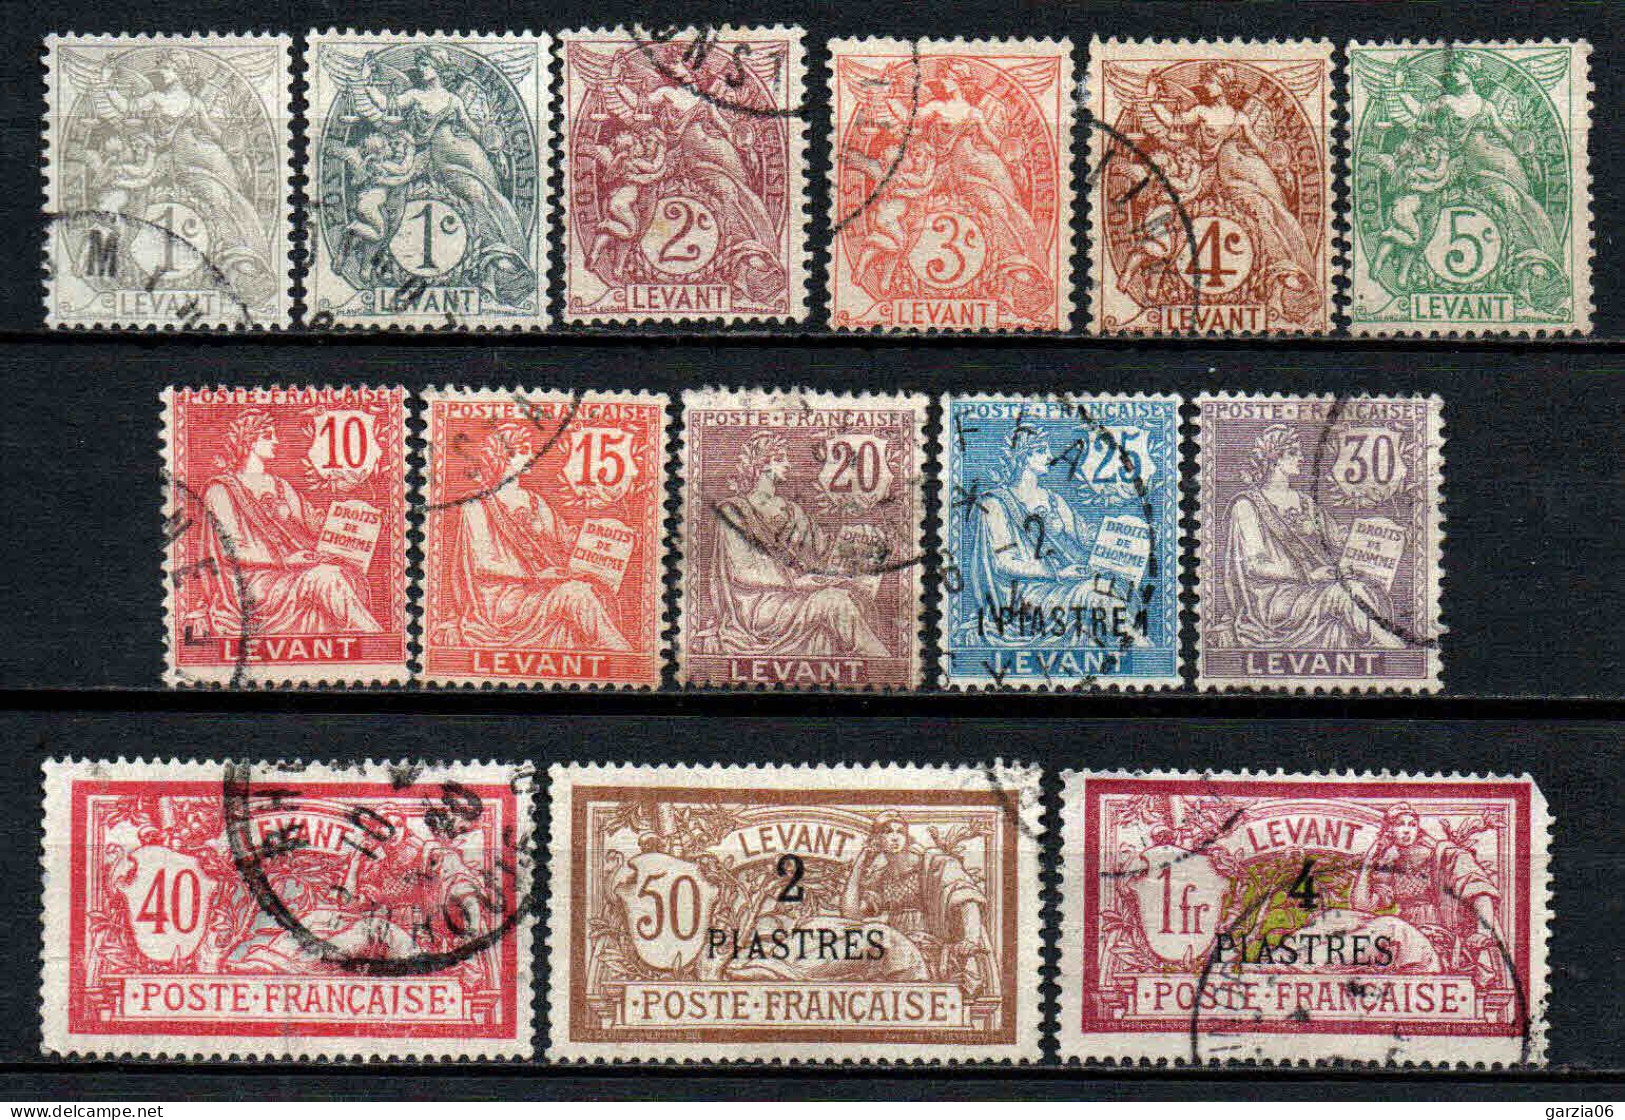 Levant  - 1902 - Type De France  - N° 9+9a à 21- Oblit - Used - Used Stamps